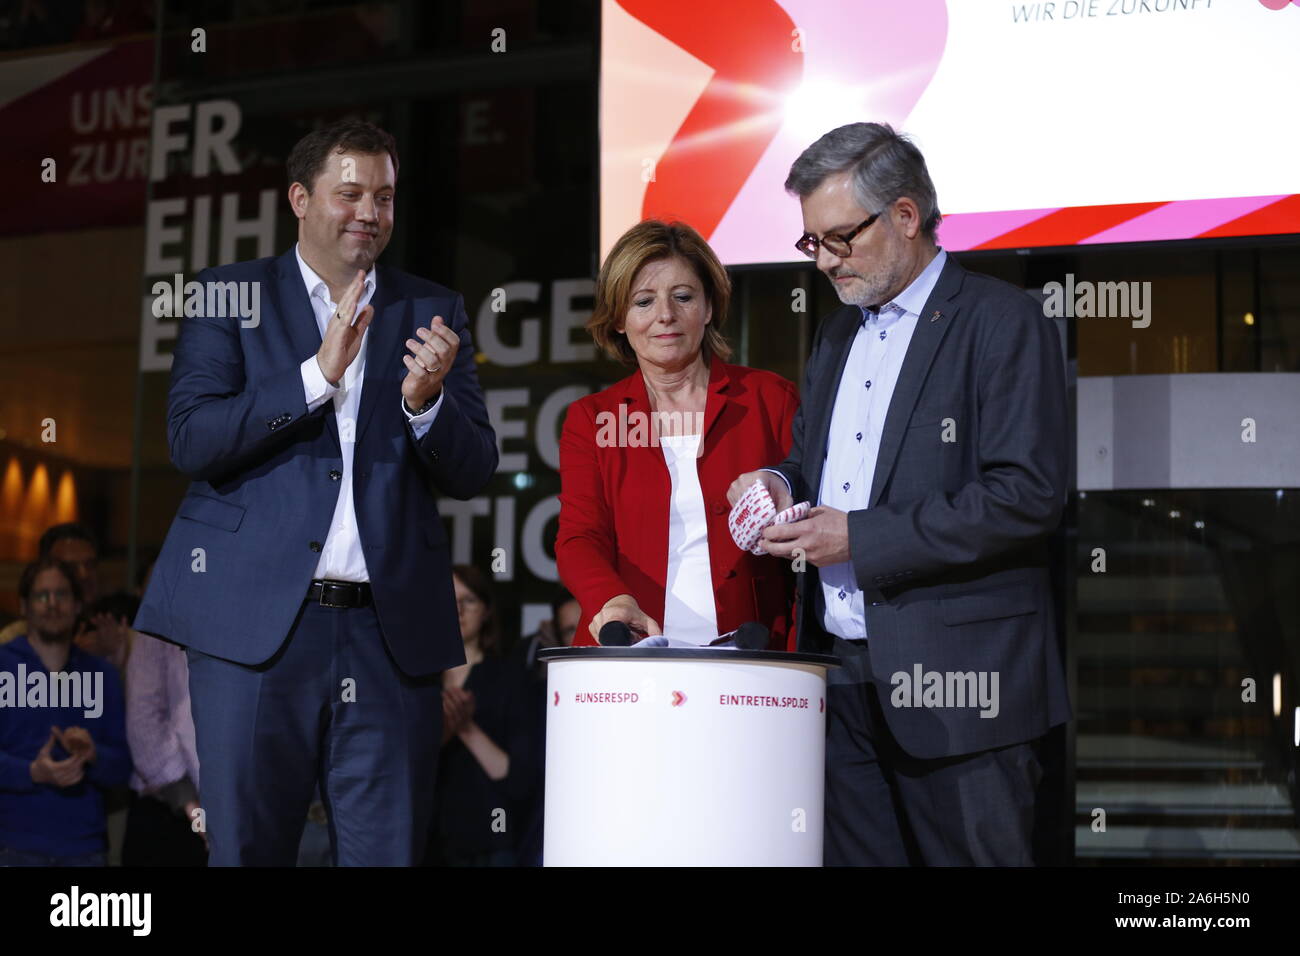 Berlin, Germany. 26th Oct, 2019. The SPD members elect Federal Finance Minister Olaf Scholz and Klara Geywitz just ahead of Norbert Walter-Borjans and Saskia Esken for the SPD presidency. The race for the SPD presidency goes into the runoff election in November: the two candidates will then be elected at the party congress. (Photo by Simone Kuhlmey/Pacific Press) Credit: Pacific Press Agency/Alamy Live News Stock Photo